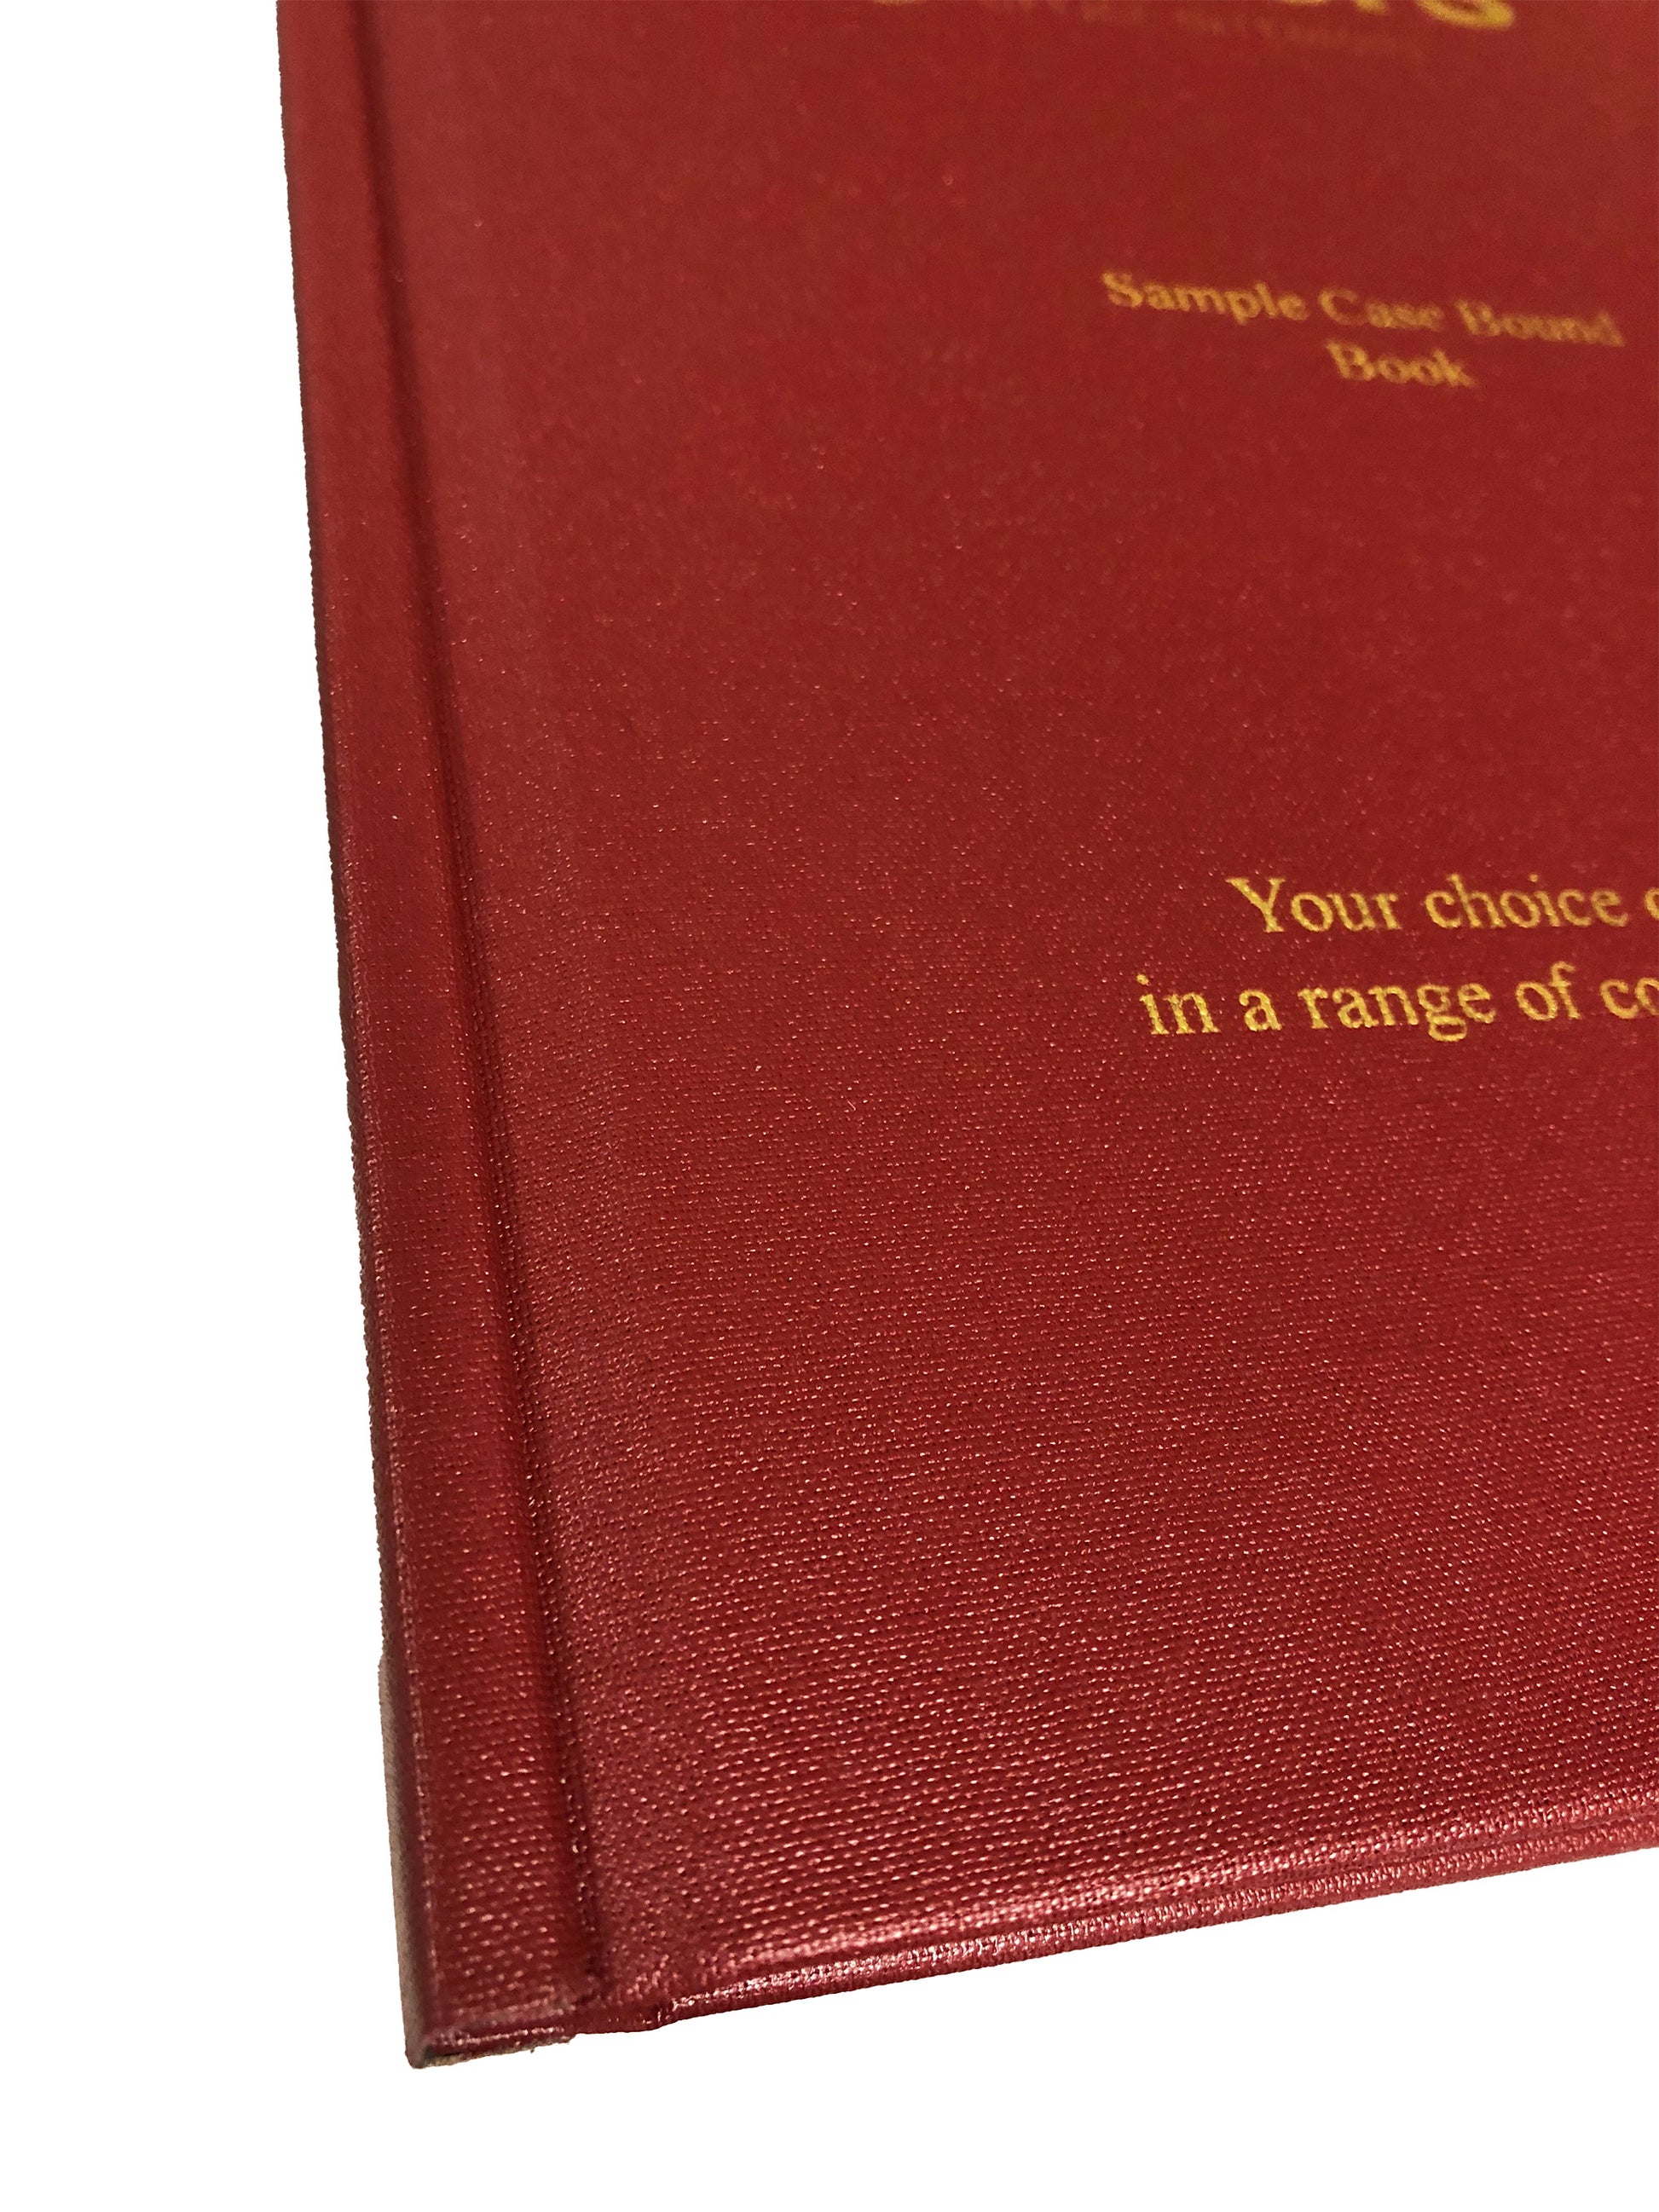 Colseup of Red buckram covered thesis with gold crest and gold lettering